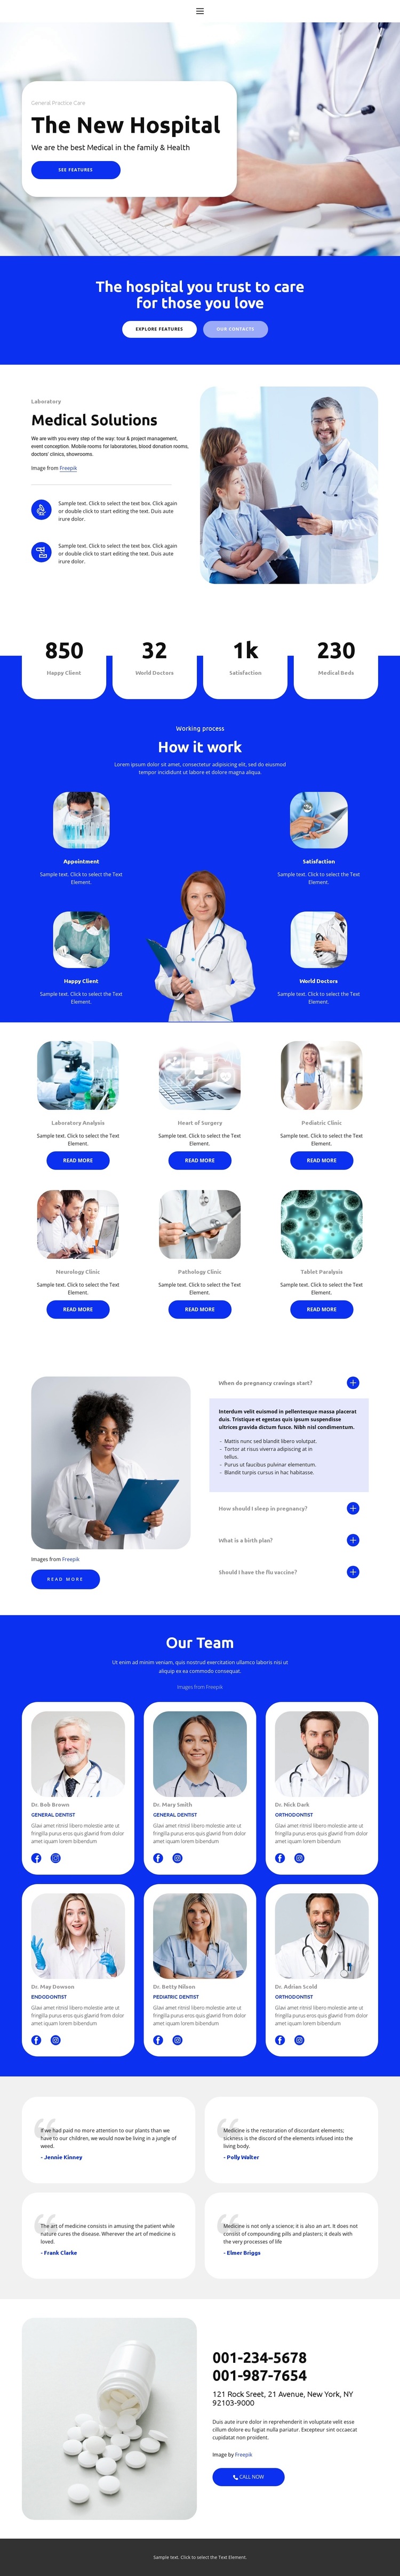 The New Hospital Joomla Page Builder